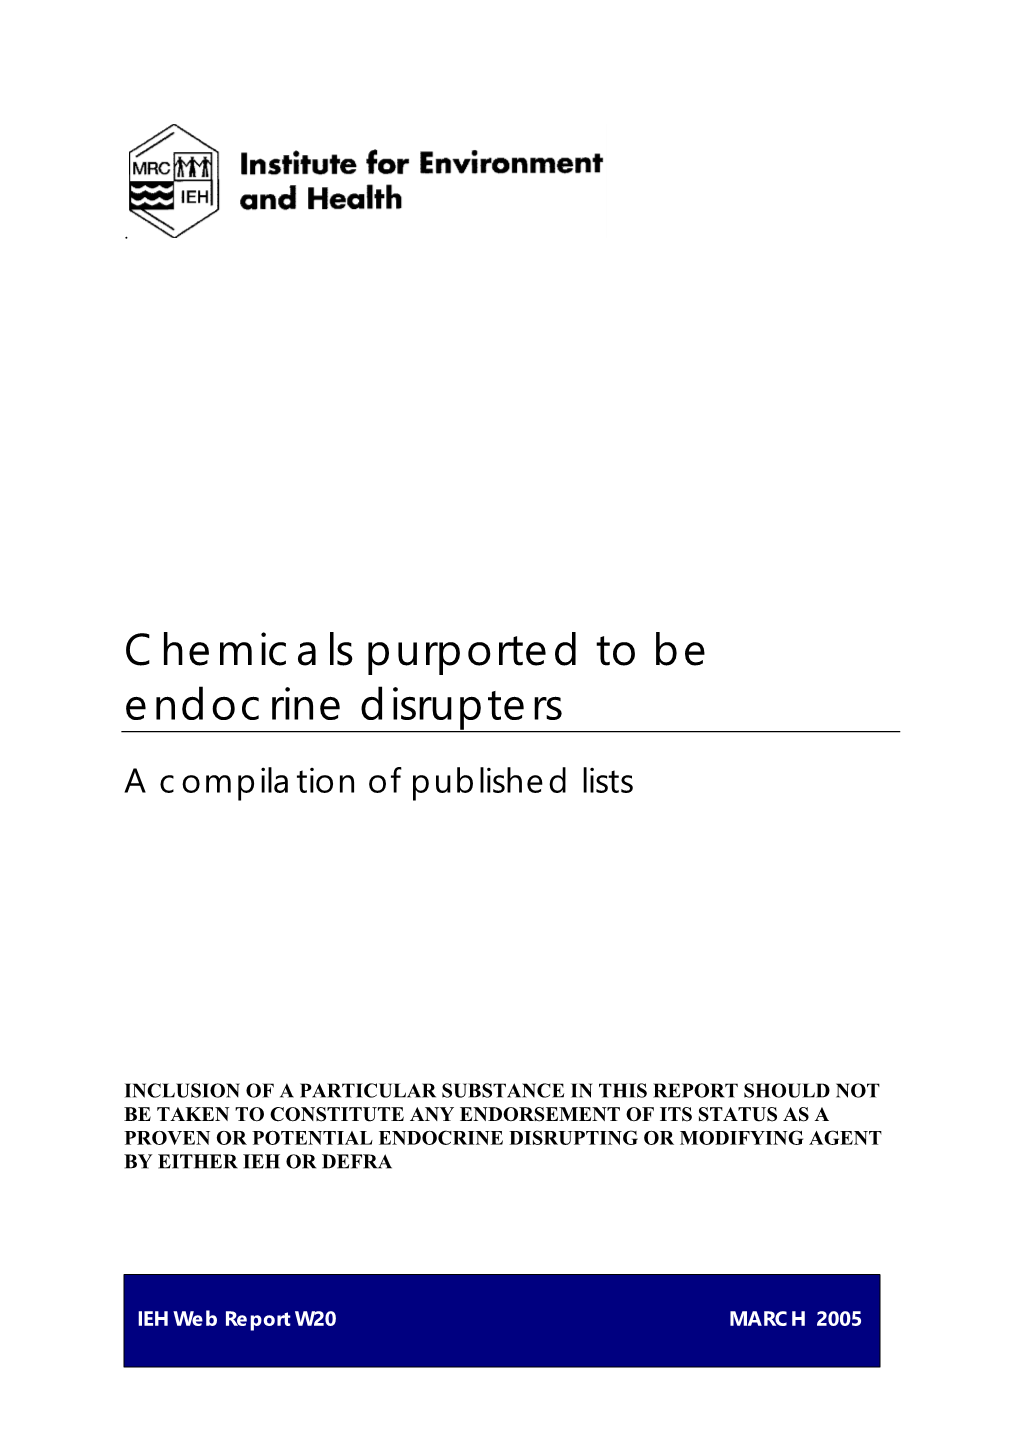 Chemicals Purported to Be Endocrine Disrupters